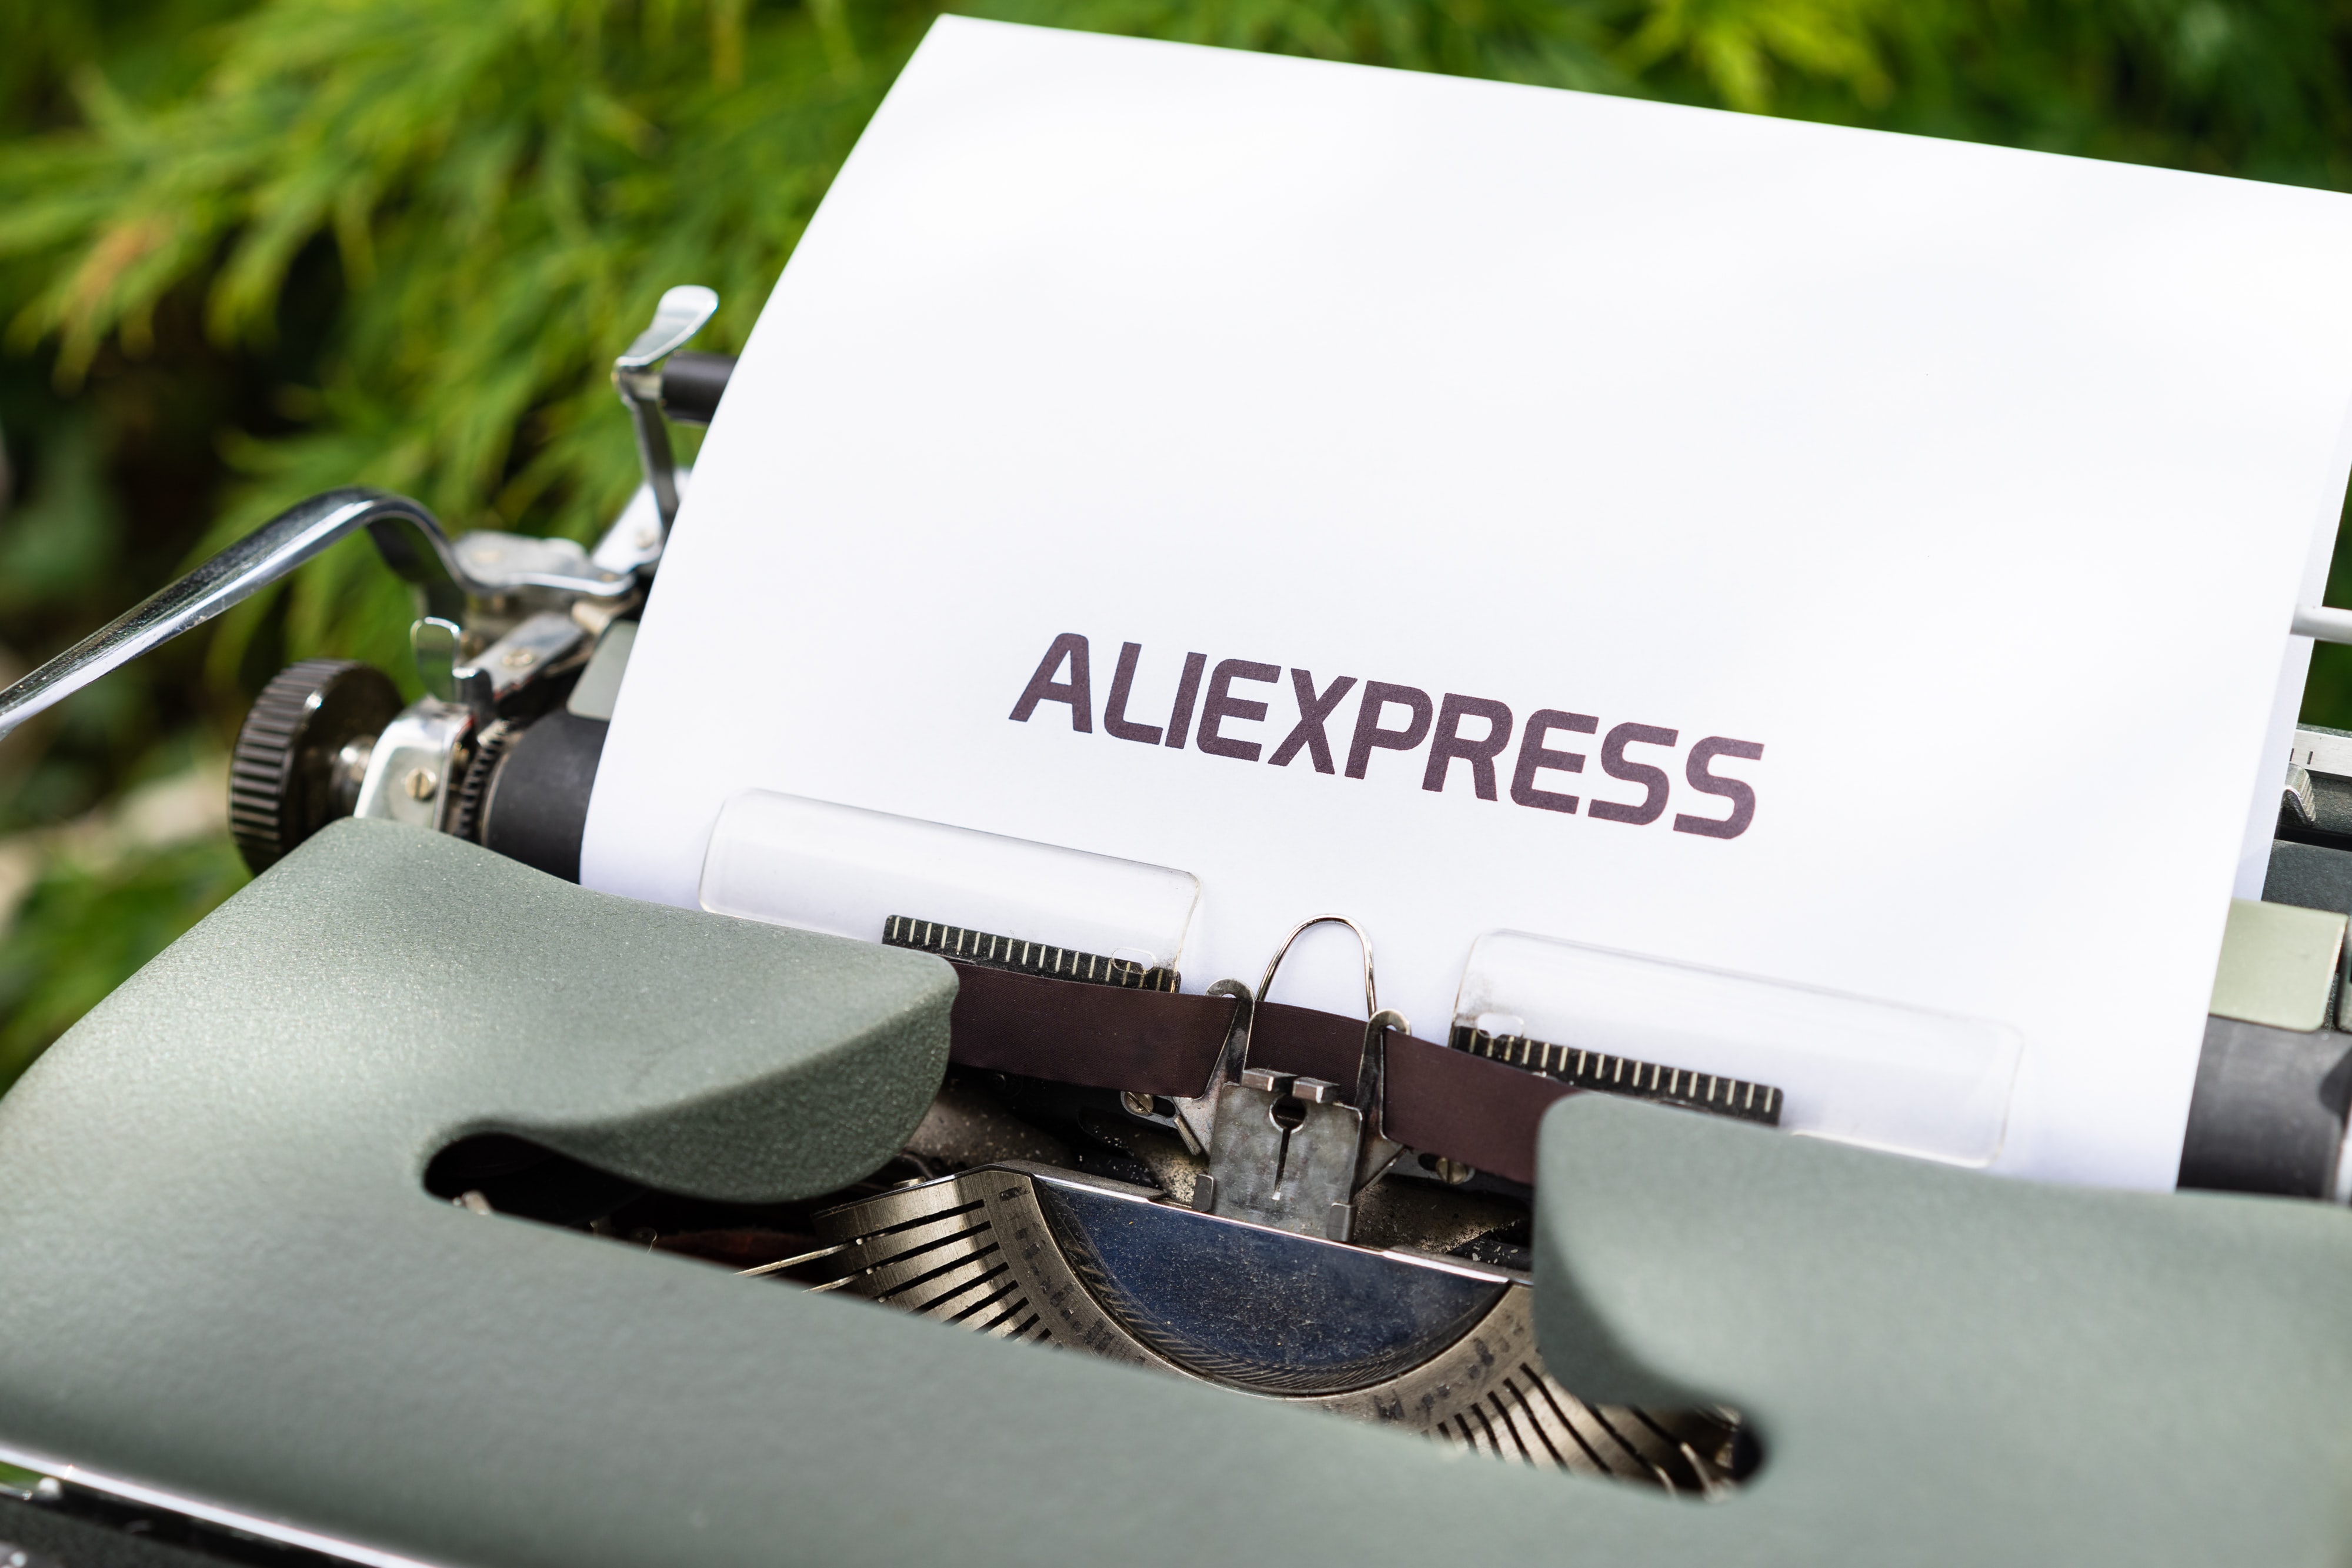 Mobilizing rural villagers with AliExpress and AliPay